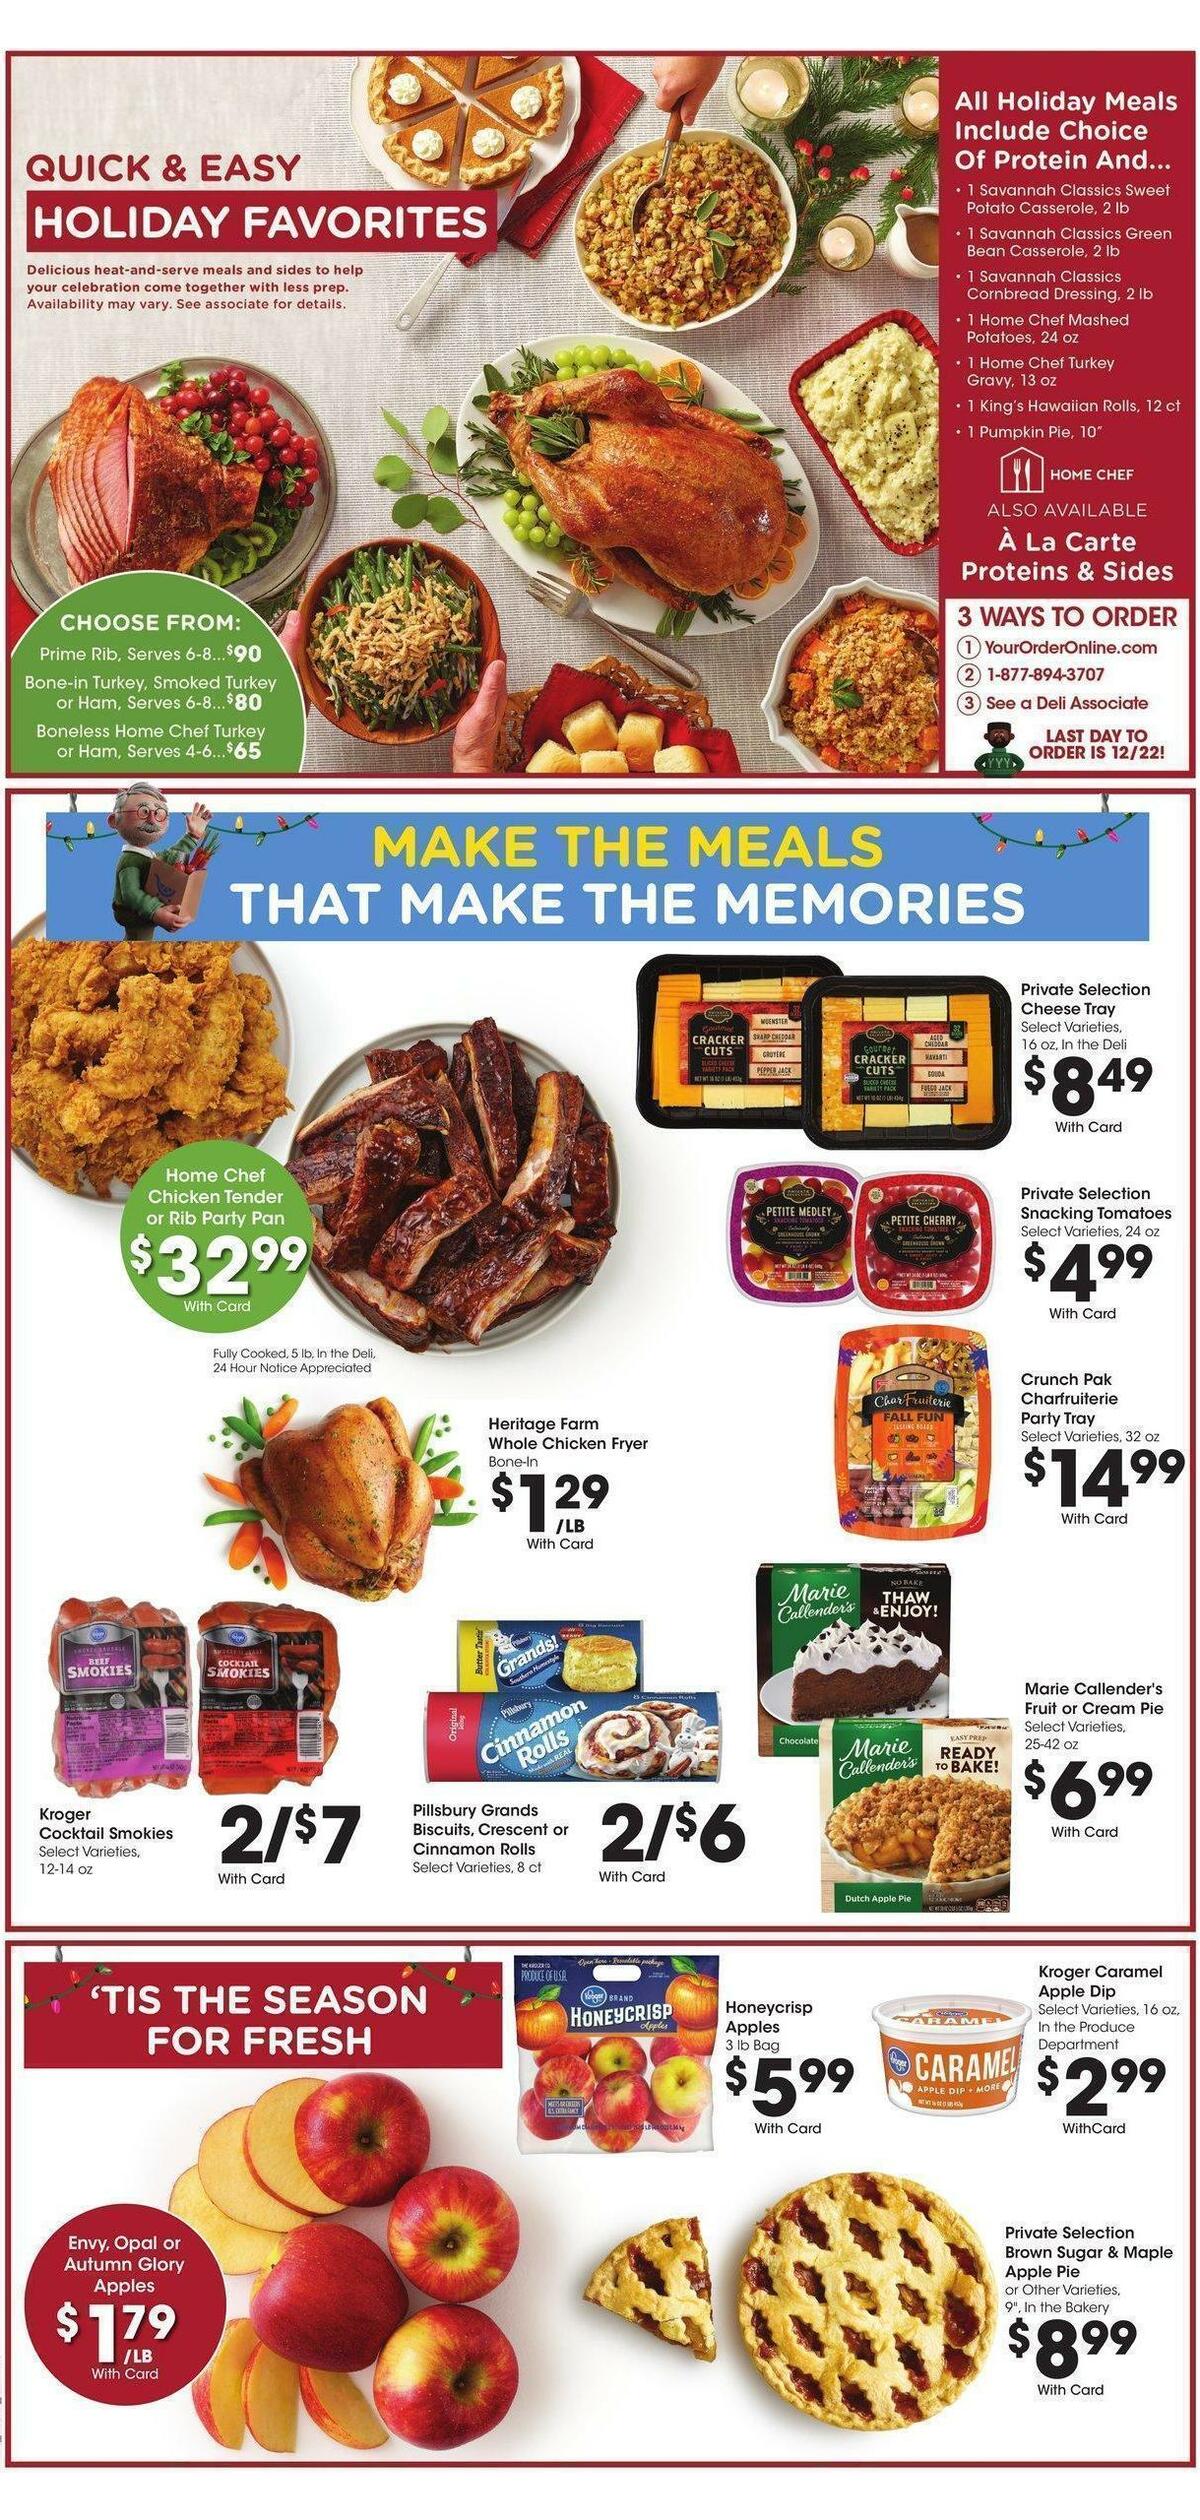 Kroger Weekly Ad from November 30